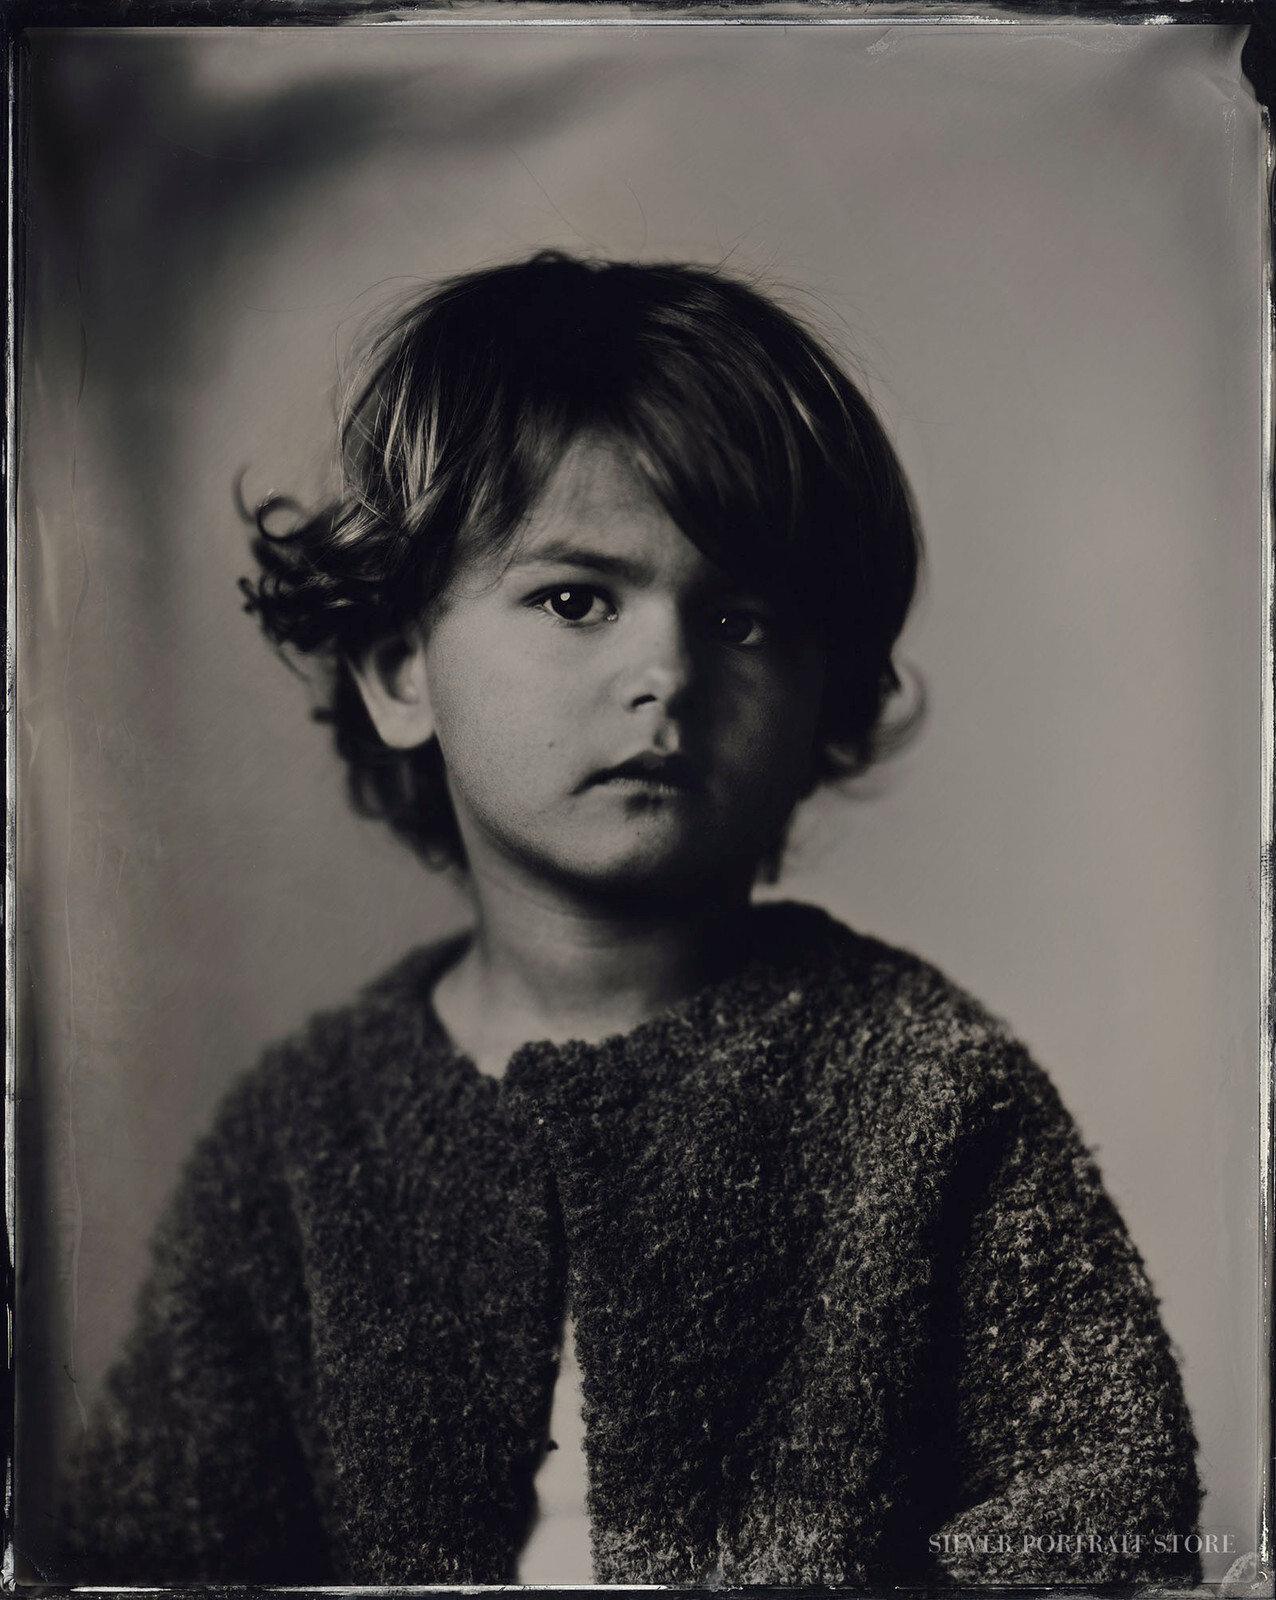 Tess-Silver Portrait Store-scan from Wet plate collodion-Tintype 20 x 25 cm.